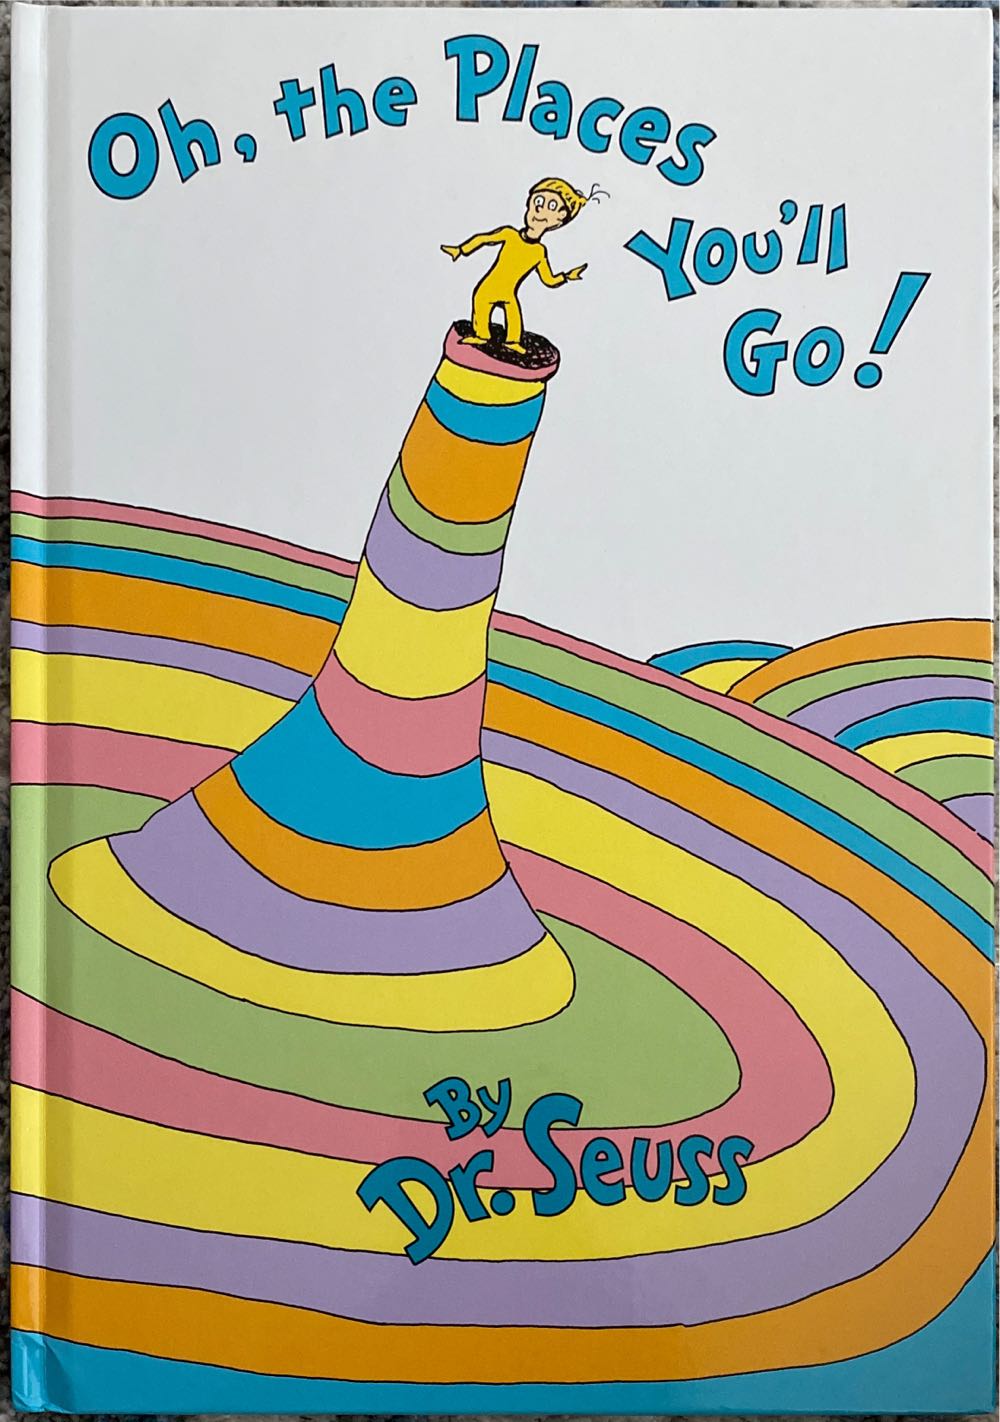 Oh, the Places You’ll Go! - Dr. Seuss (Random House, Inc. - Hardcover) book collectible [Barcode 9780679805274] - Main Image 4